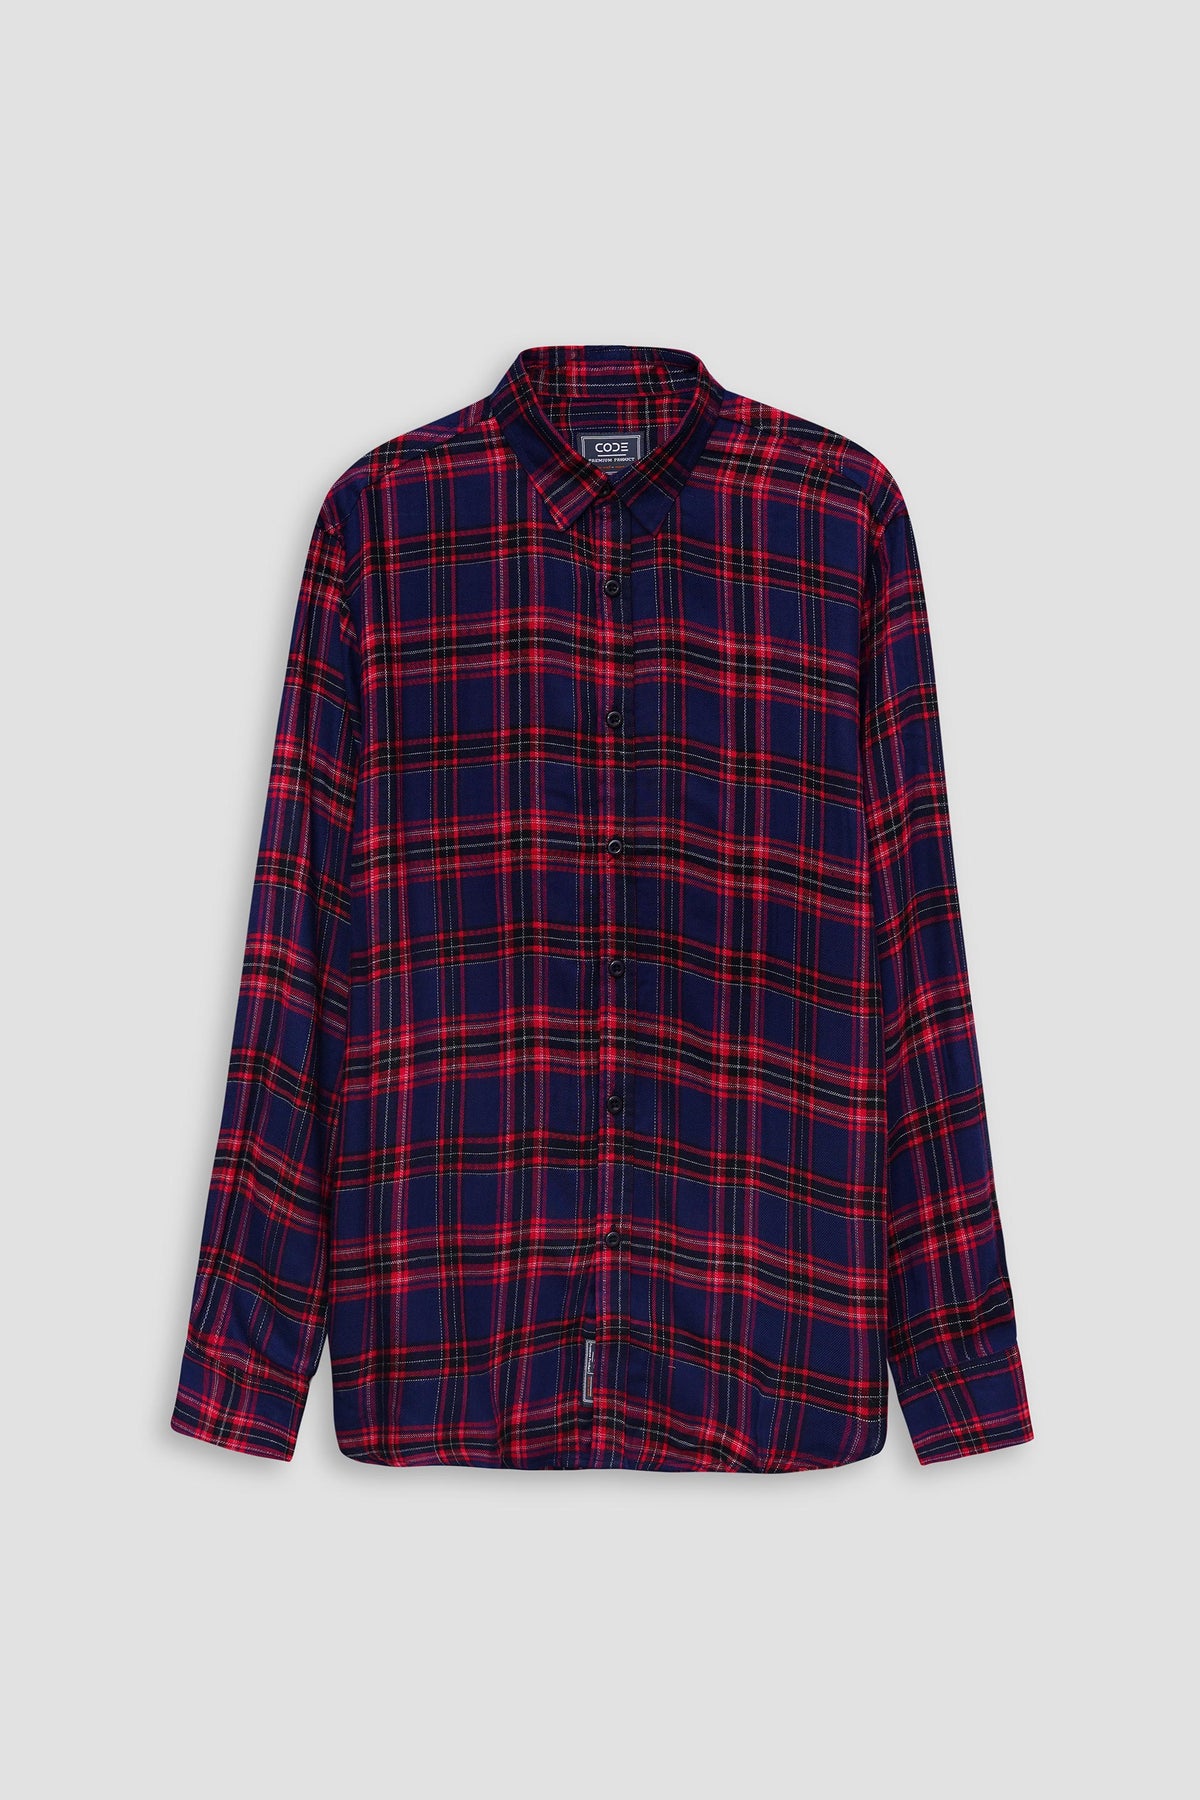 Check Red/Blue Casual Shirt